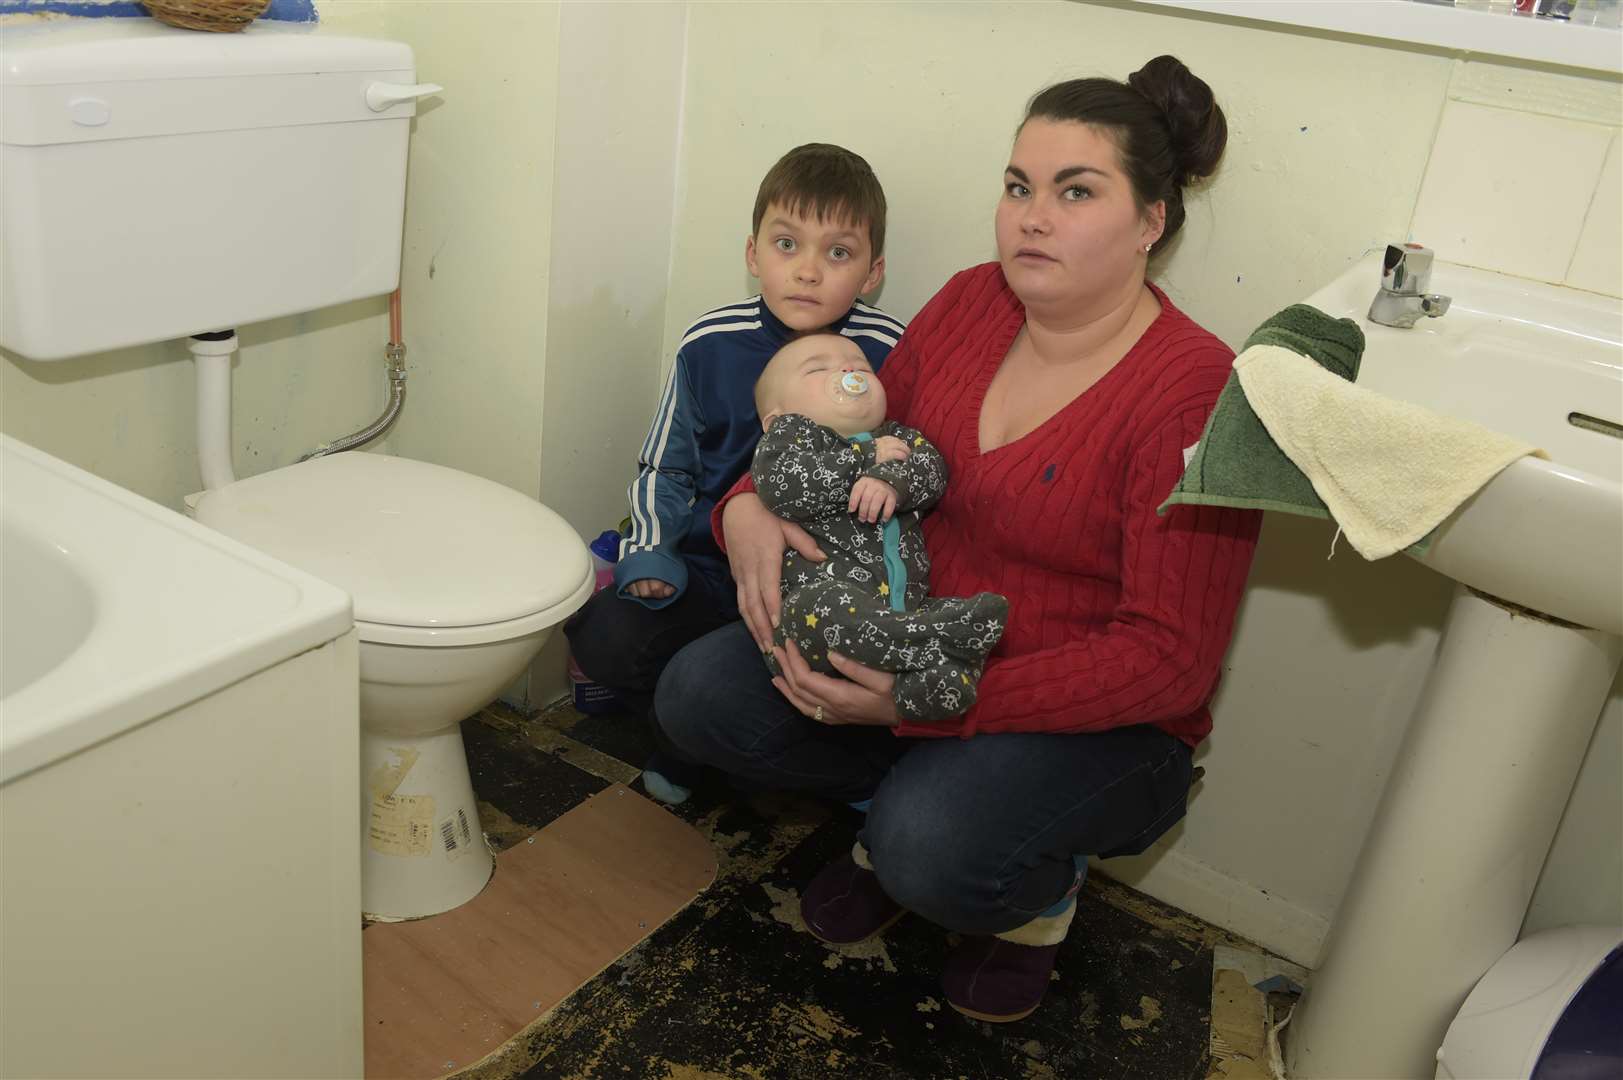 Links Road, Deal. Louise New is concerned about a leak in her bathroom. eight year old Jake New, four month old Bleu New and Louise New.Picture: Tony Flashman (1209073)